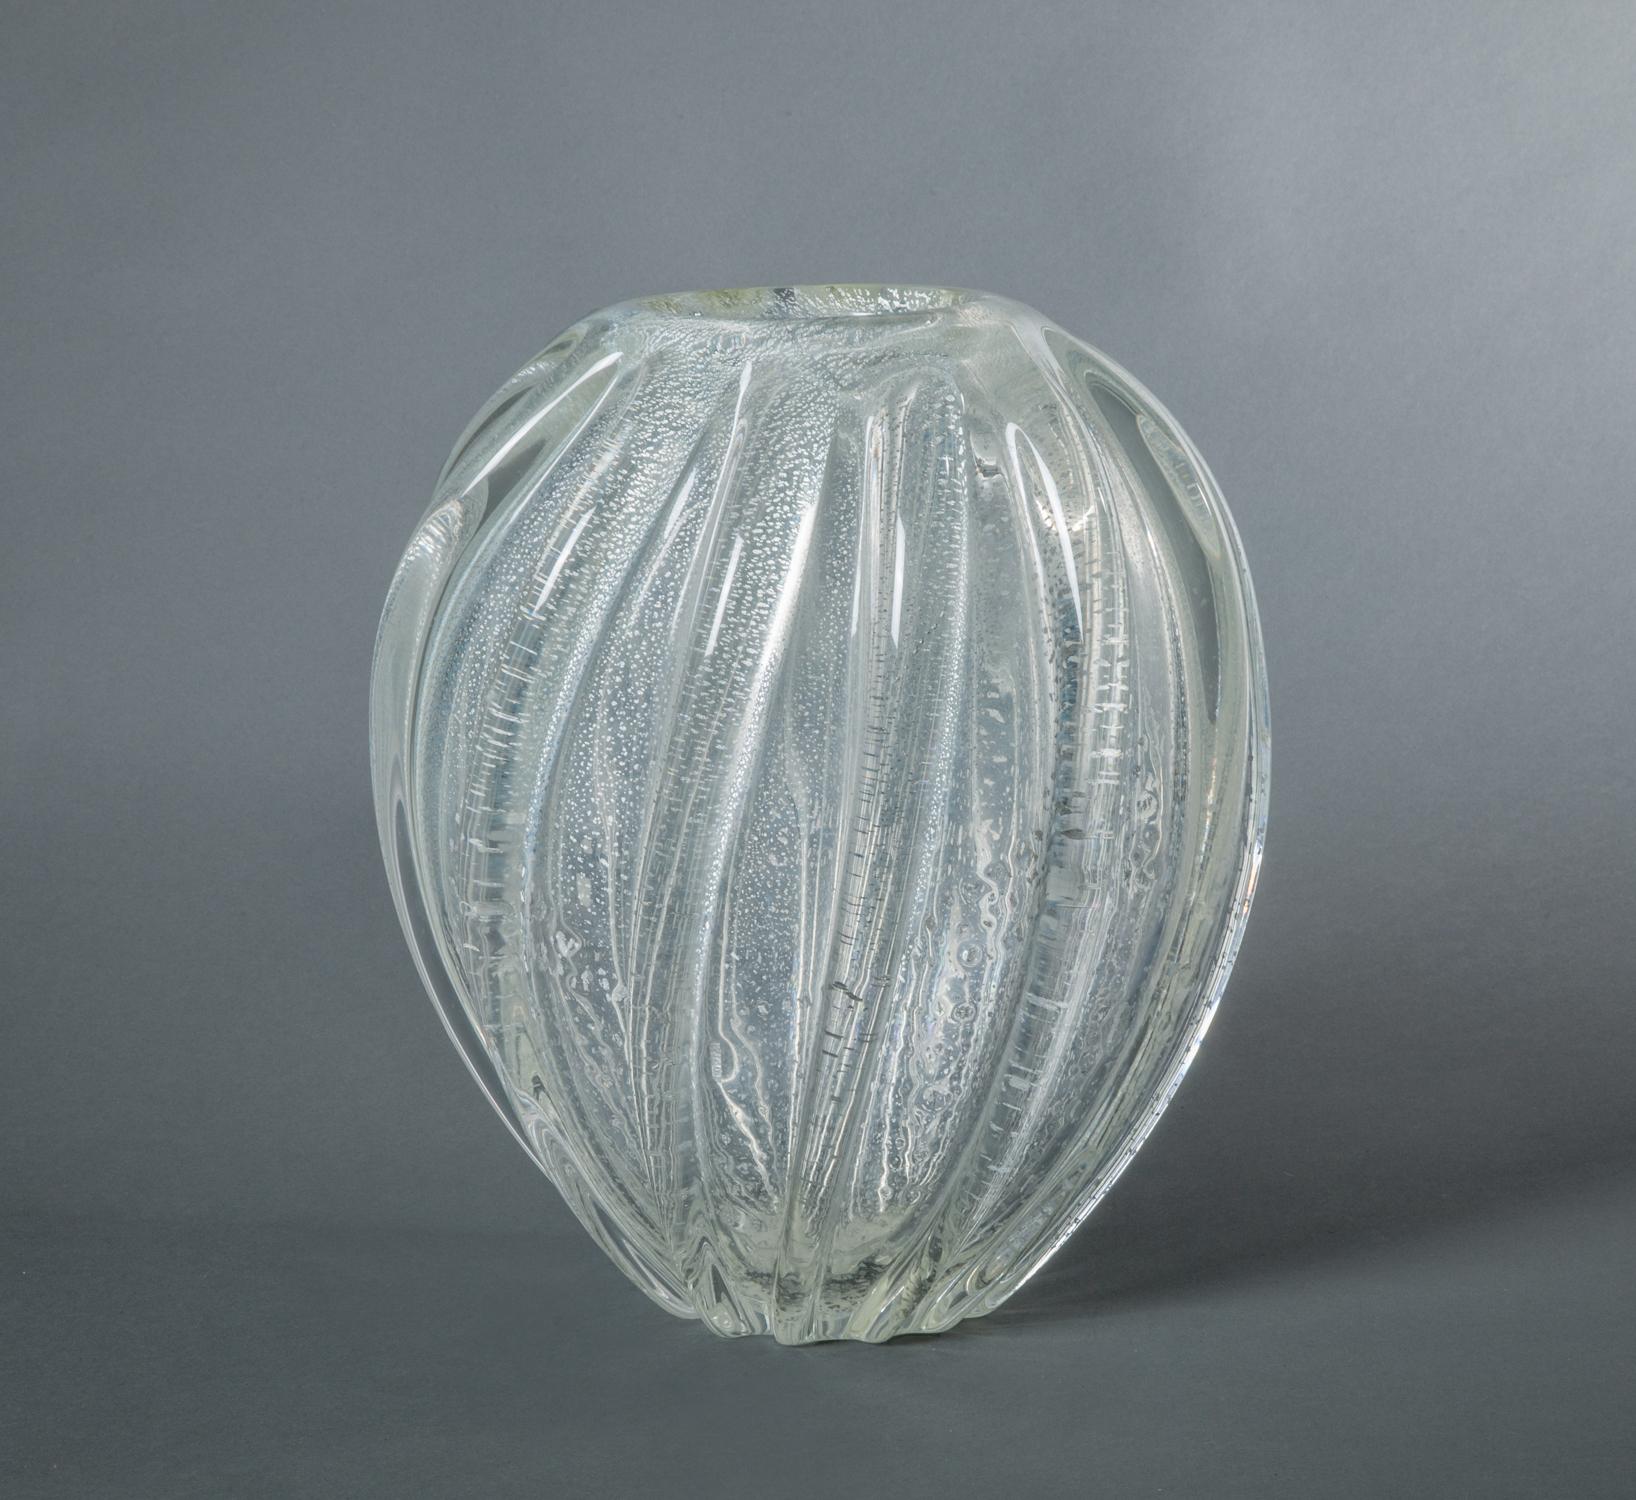 Seguso Murano Italian glass vase, beautiful twisted fluted design with silver leaf suspended in the glass. The thickness of the glass allows this vase to hold your top-heavy flowers like peonies. Marked Seguso Murano on the bottom.
  